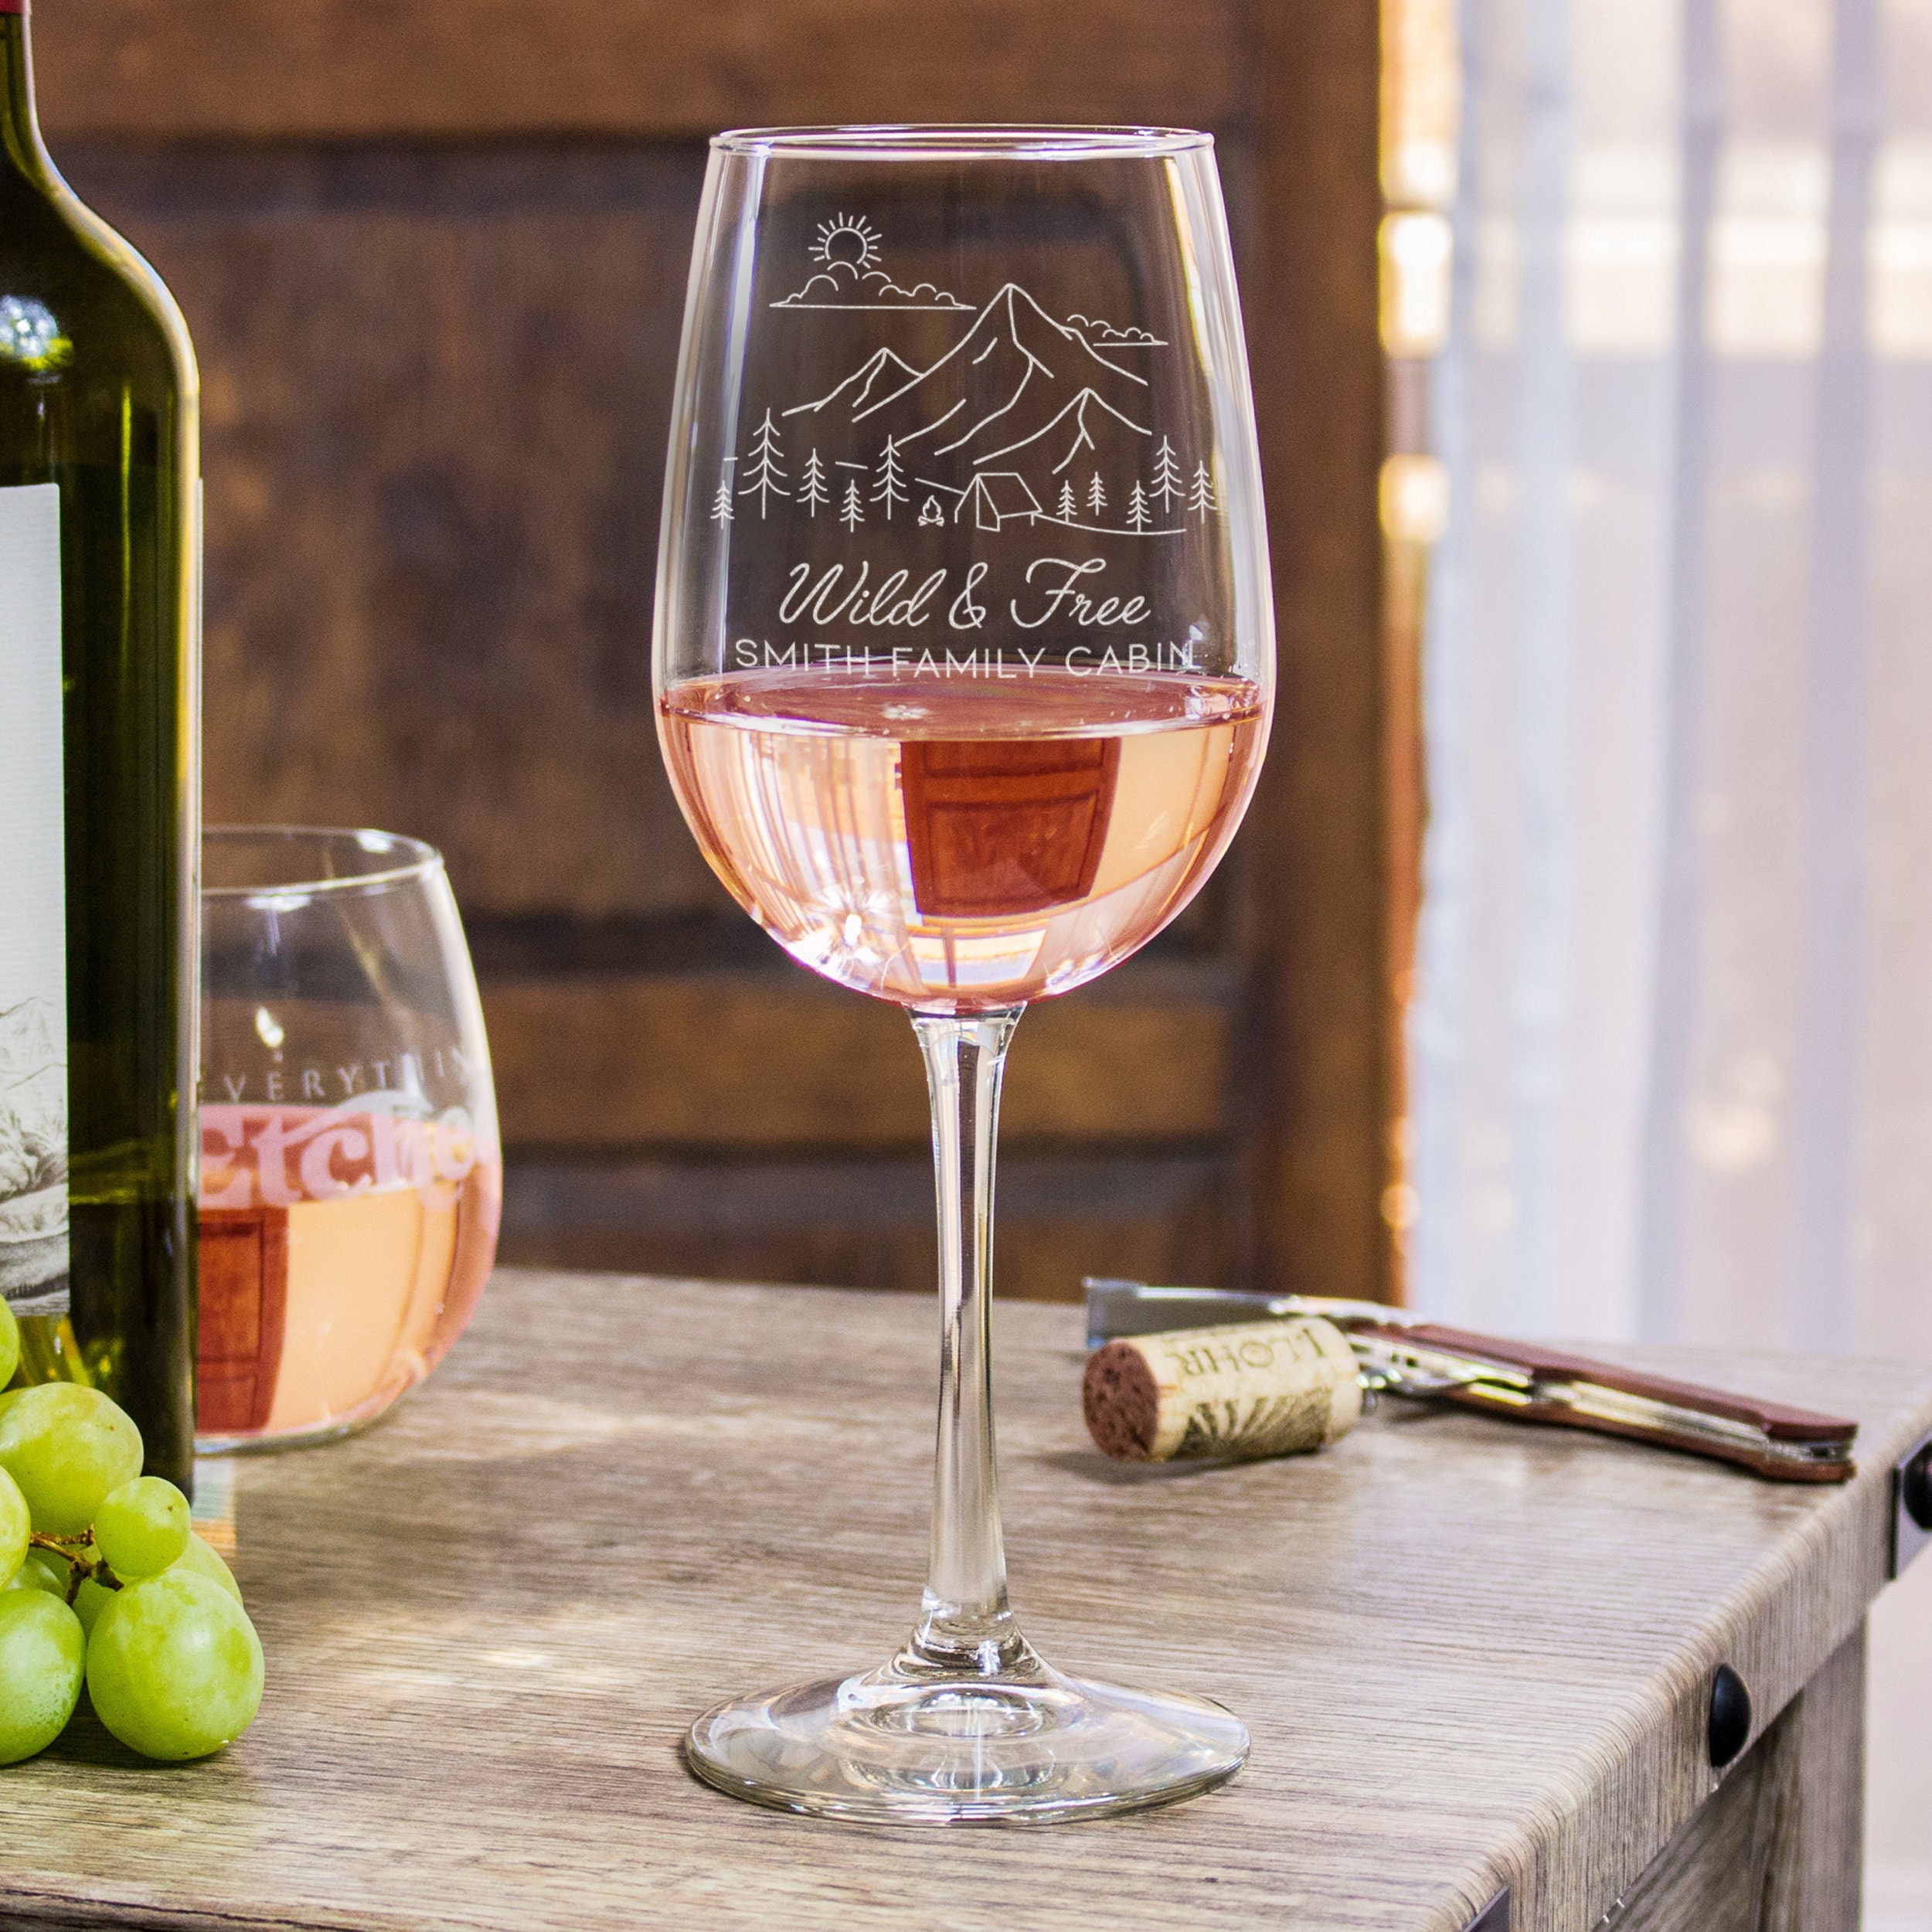 Personalize wine glasses with glass etching cream - The V Spot